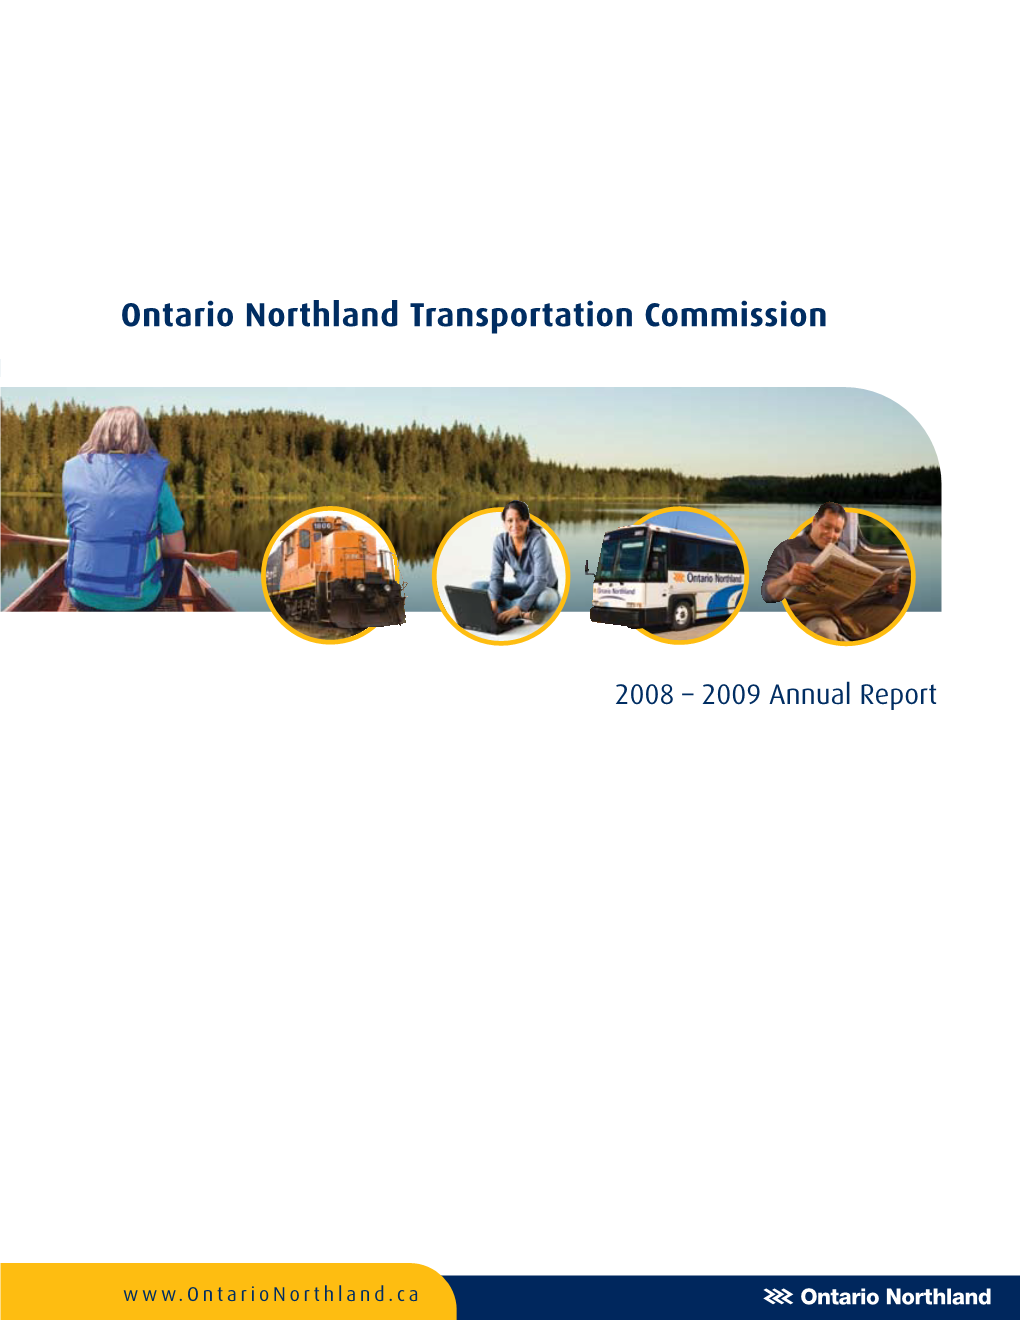 Ontario Northland Transportation Commission and the Minister of Northern Development and Mines